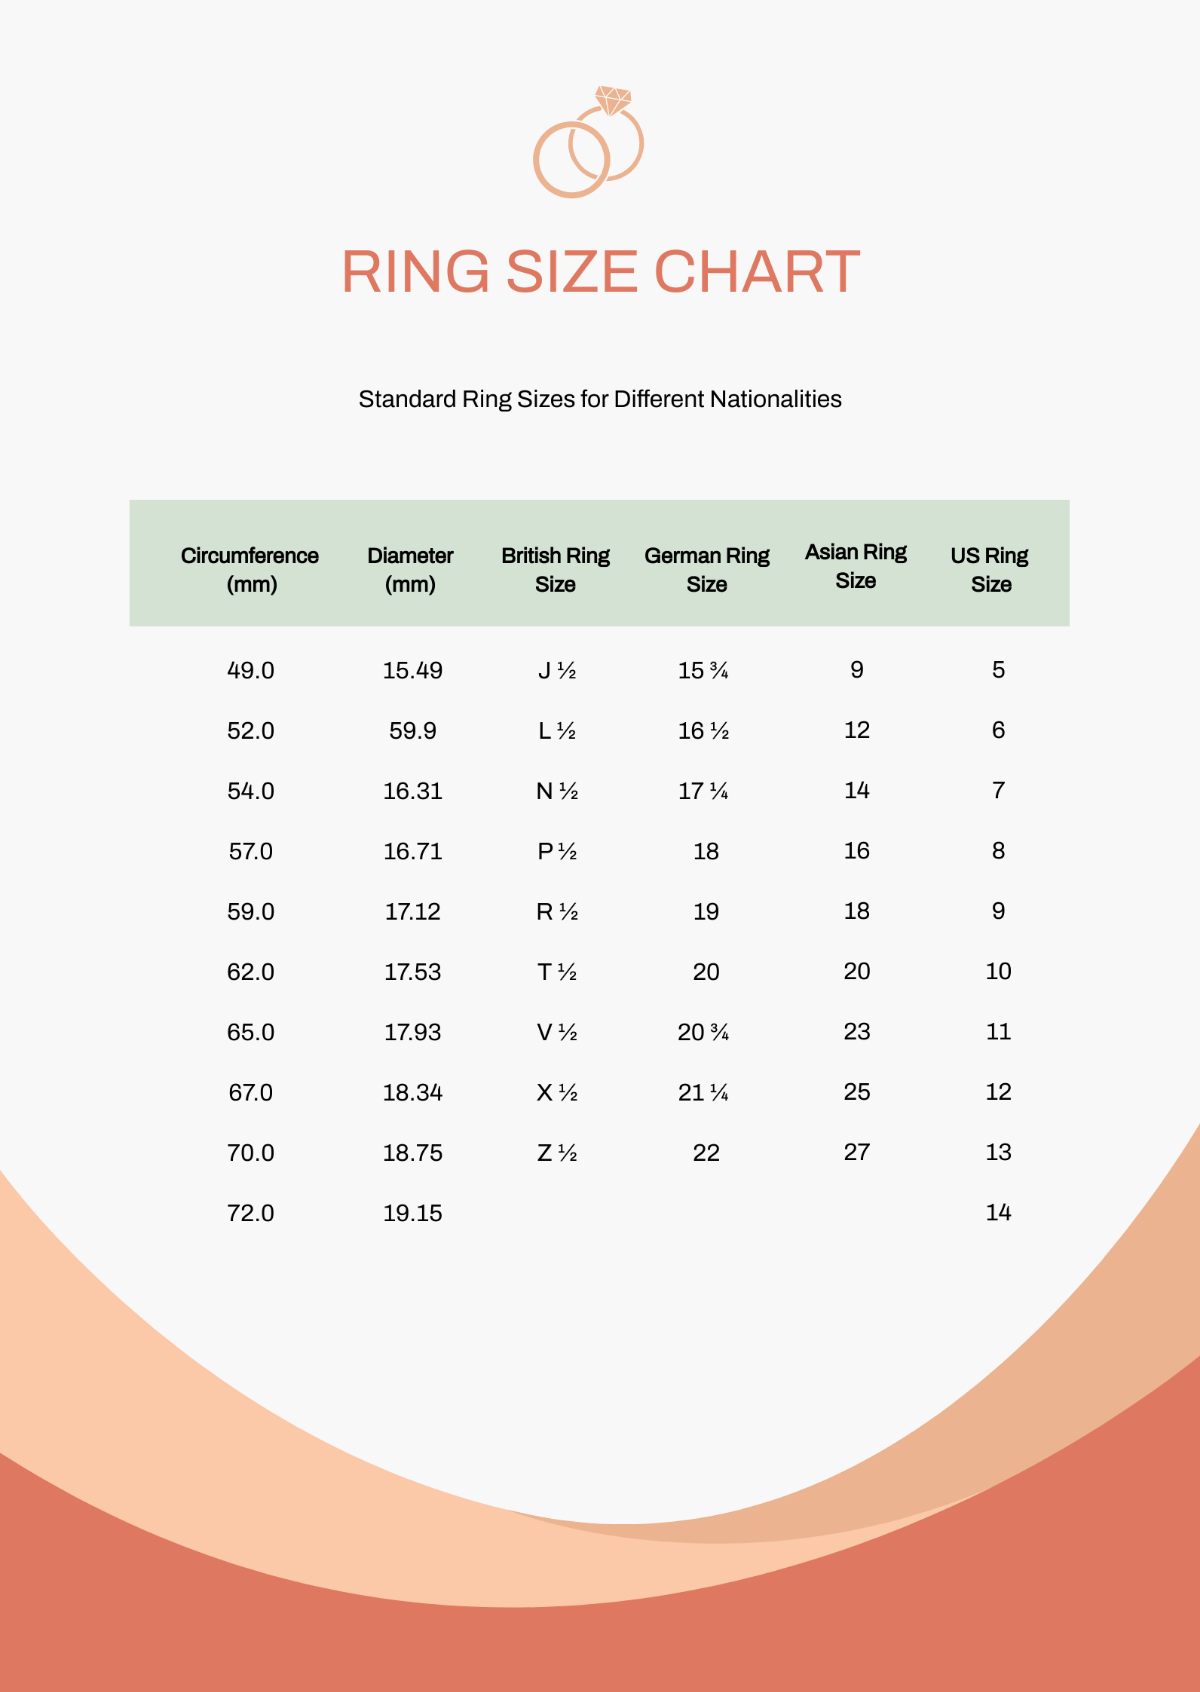 FREE Ring - Edit Online & Download | Template.net